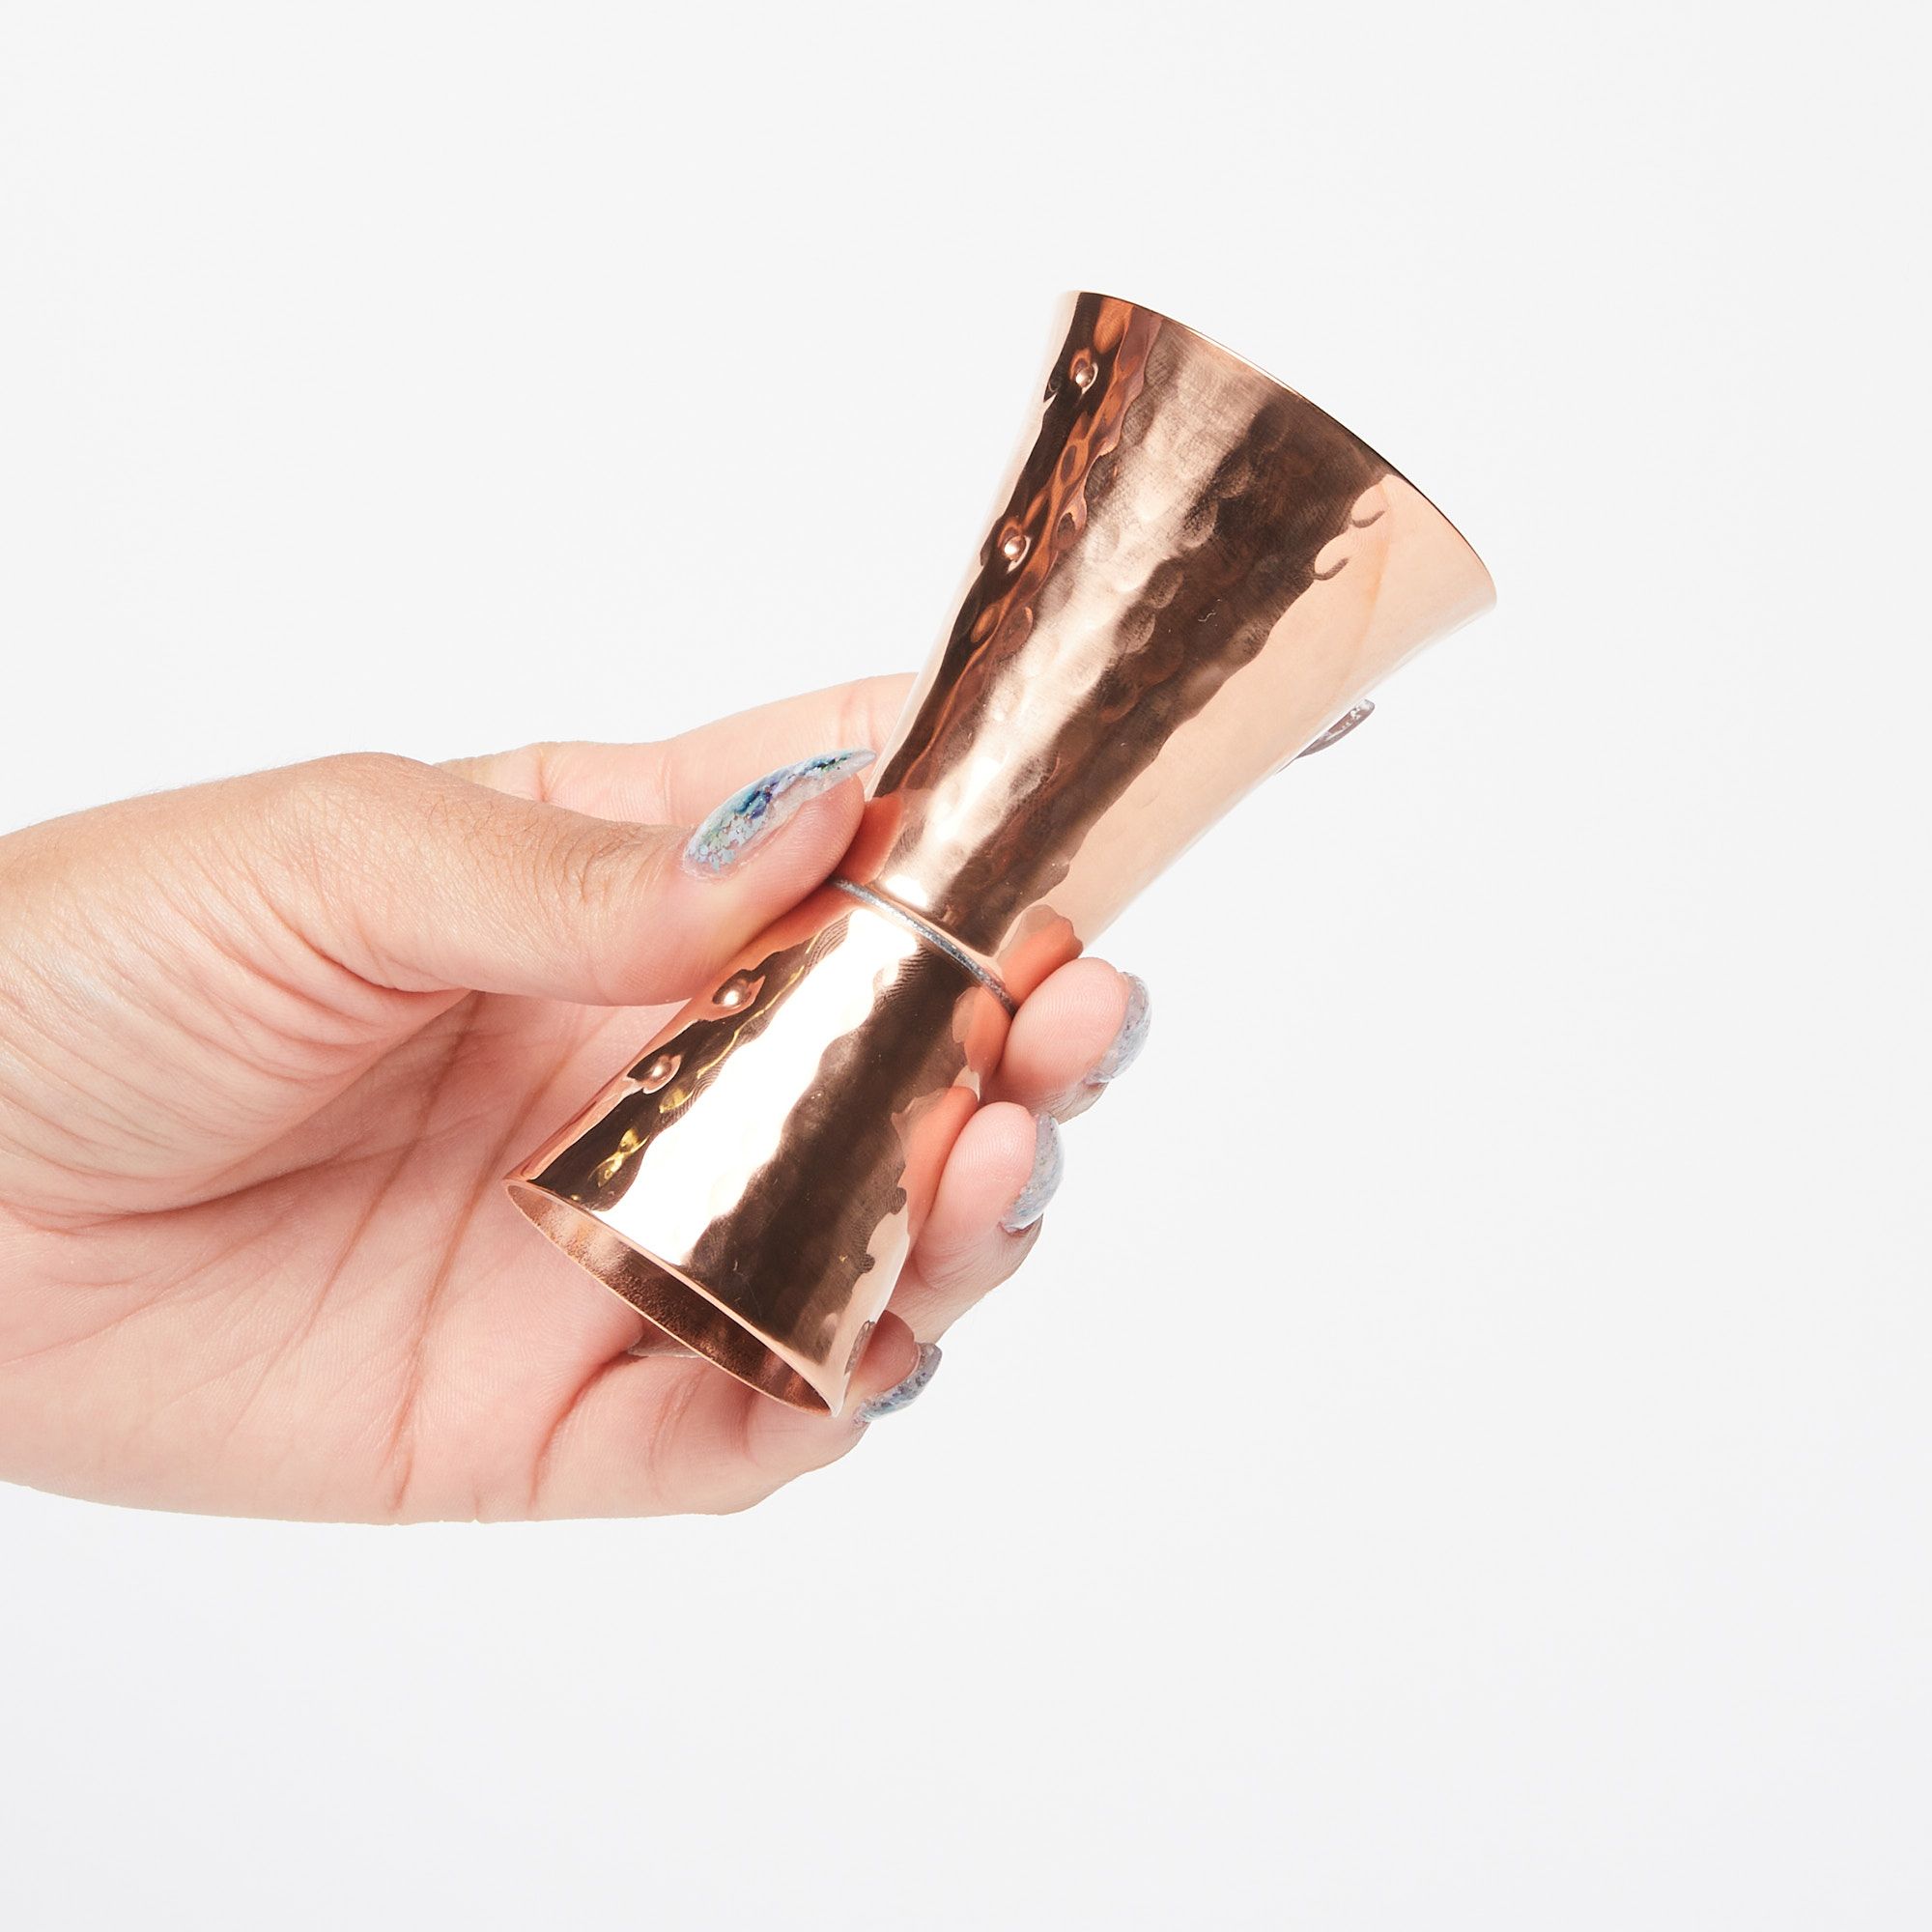 Hand holding a double sided copper shot measurer with the large end up